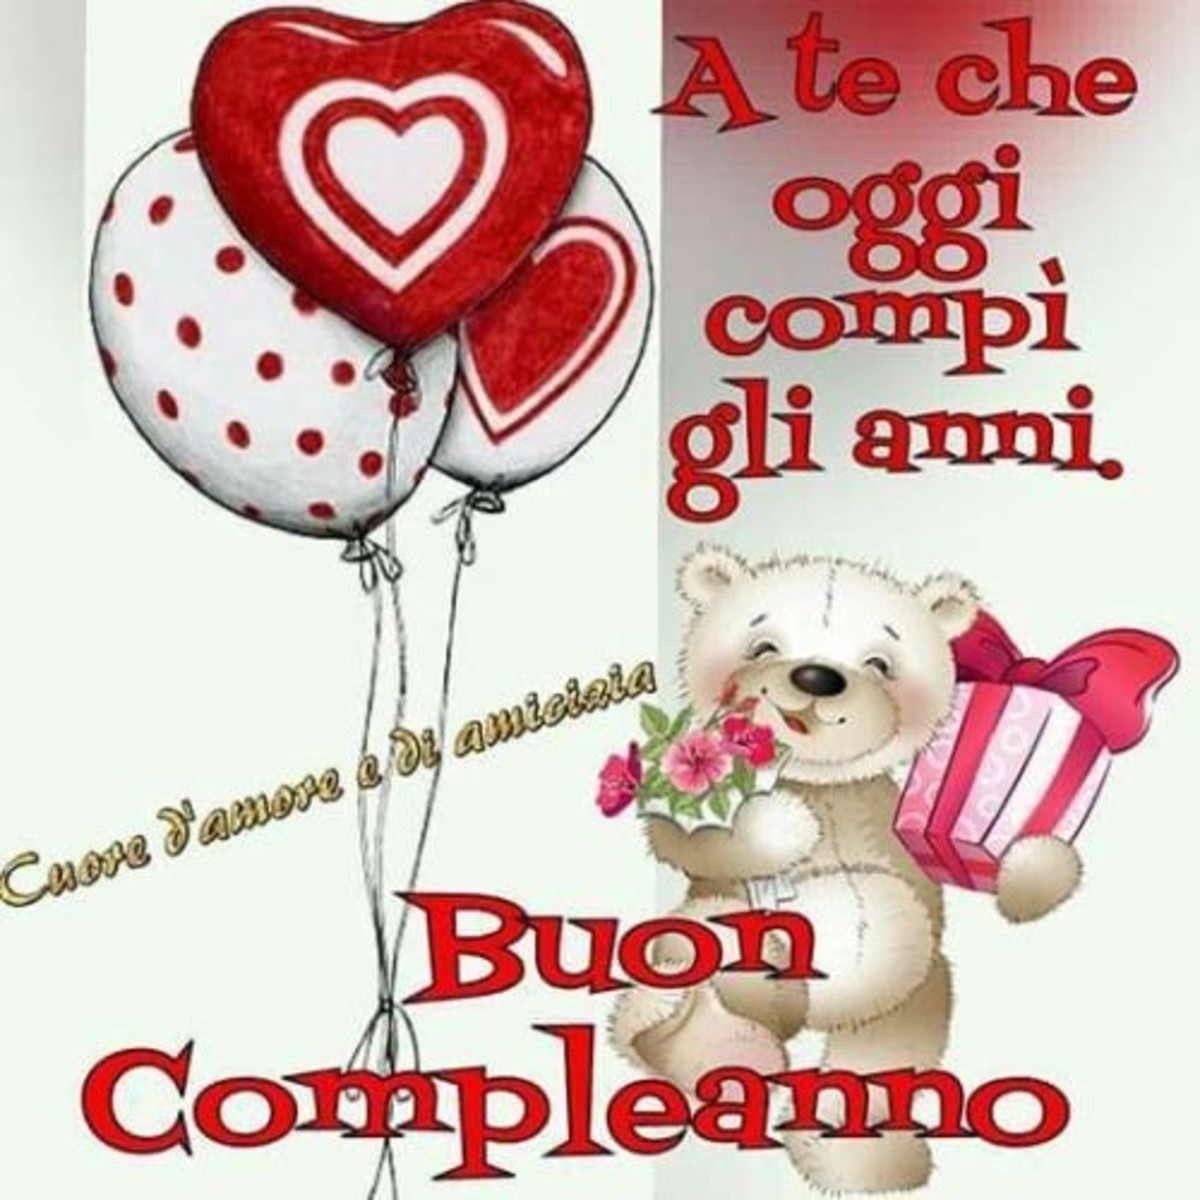 Buon compleanno dolce